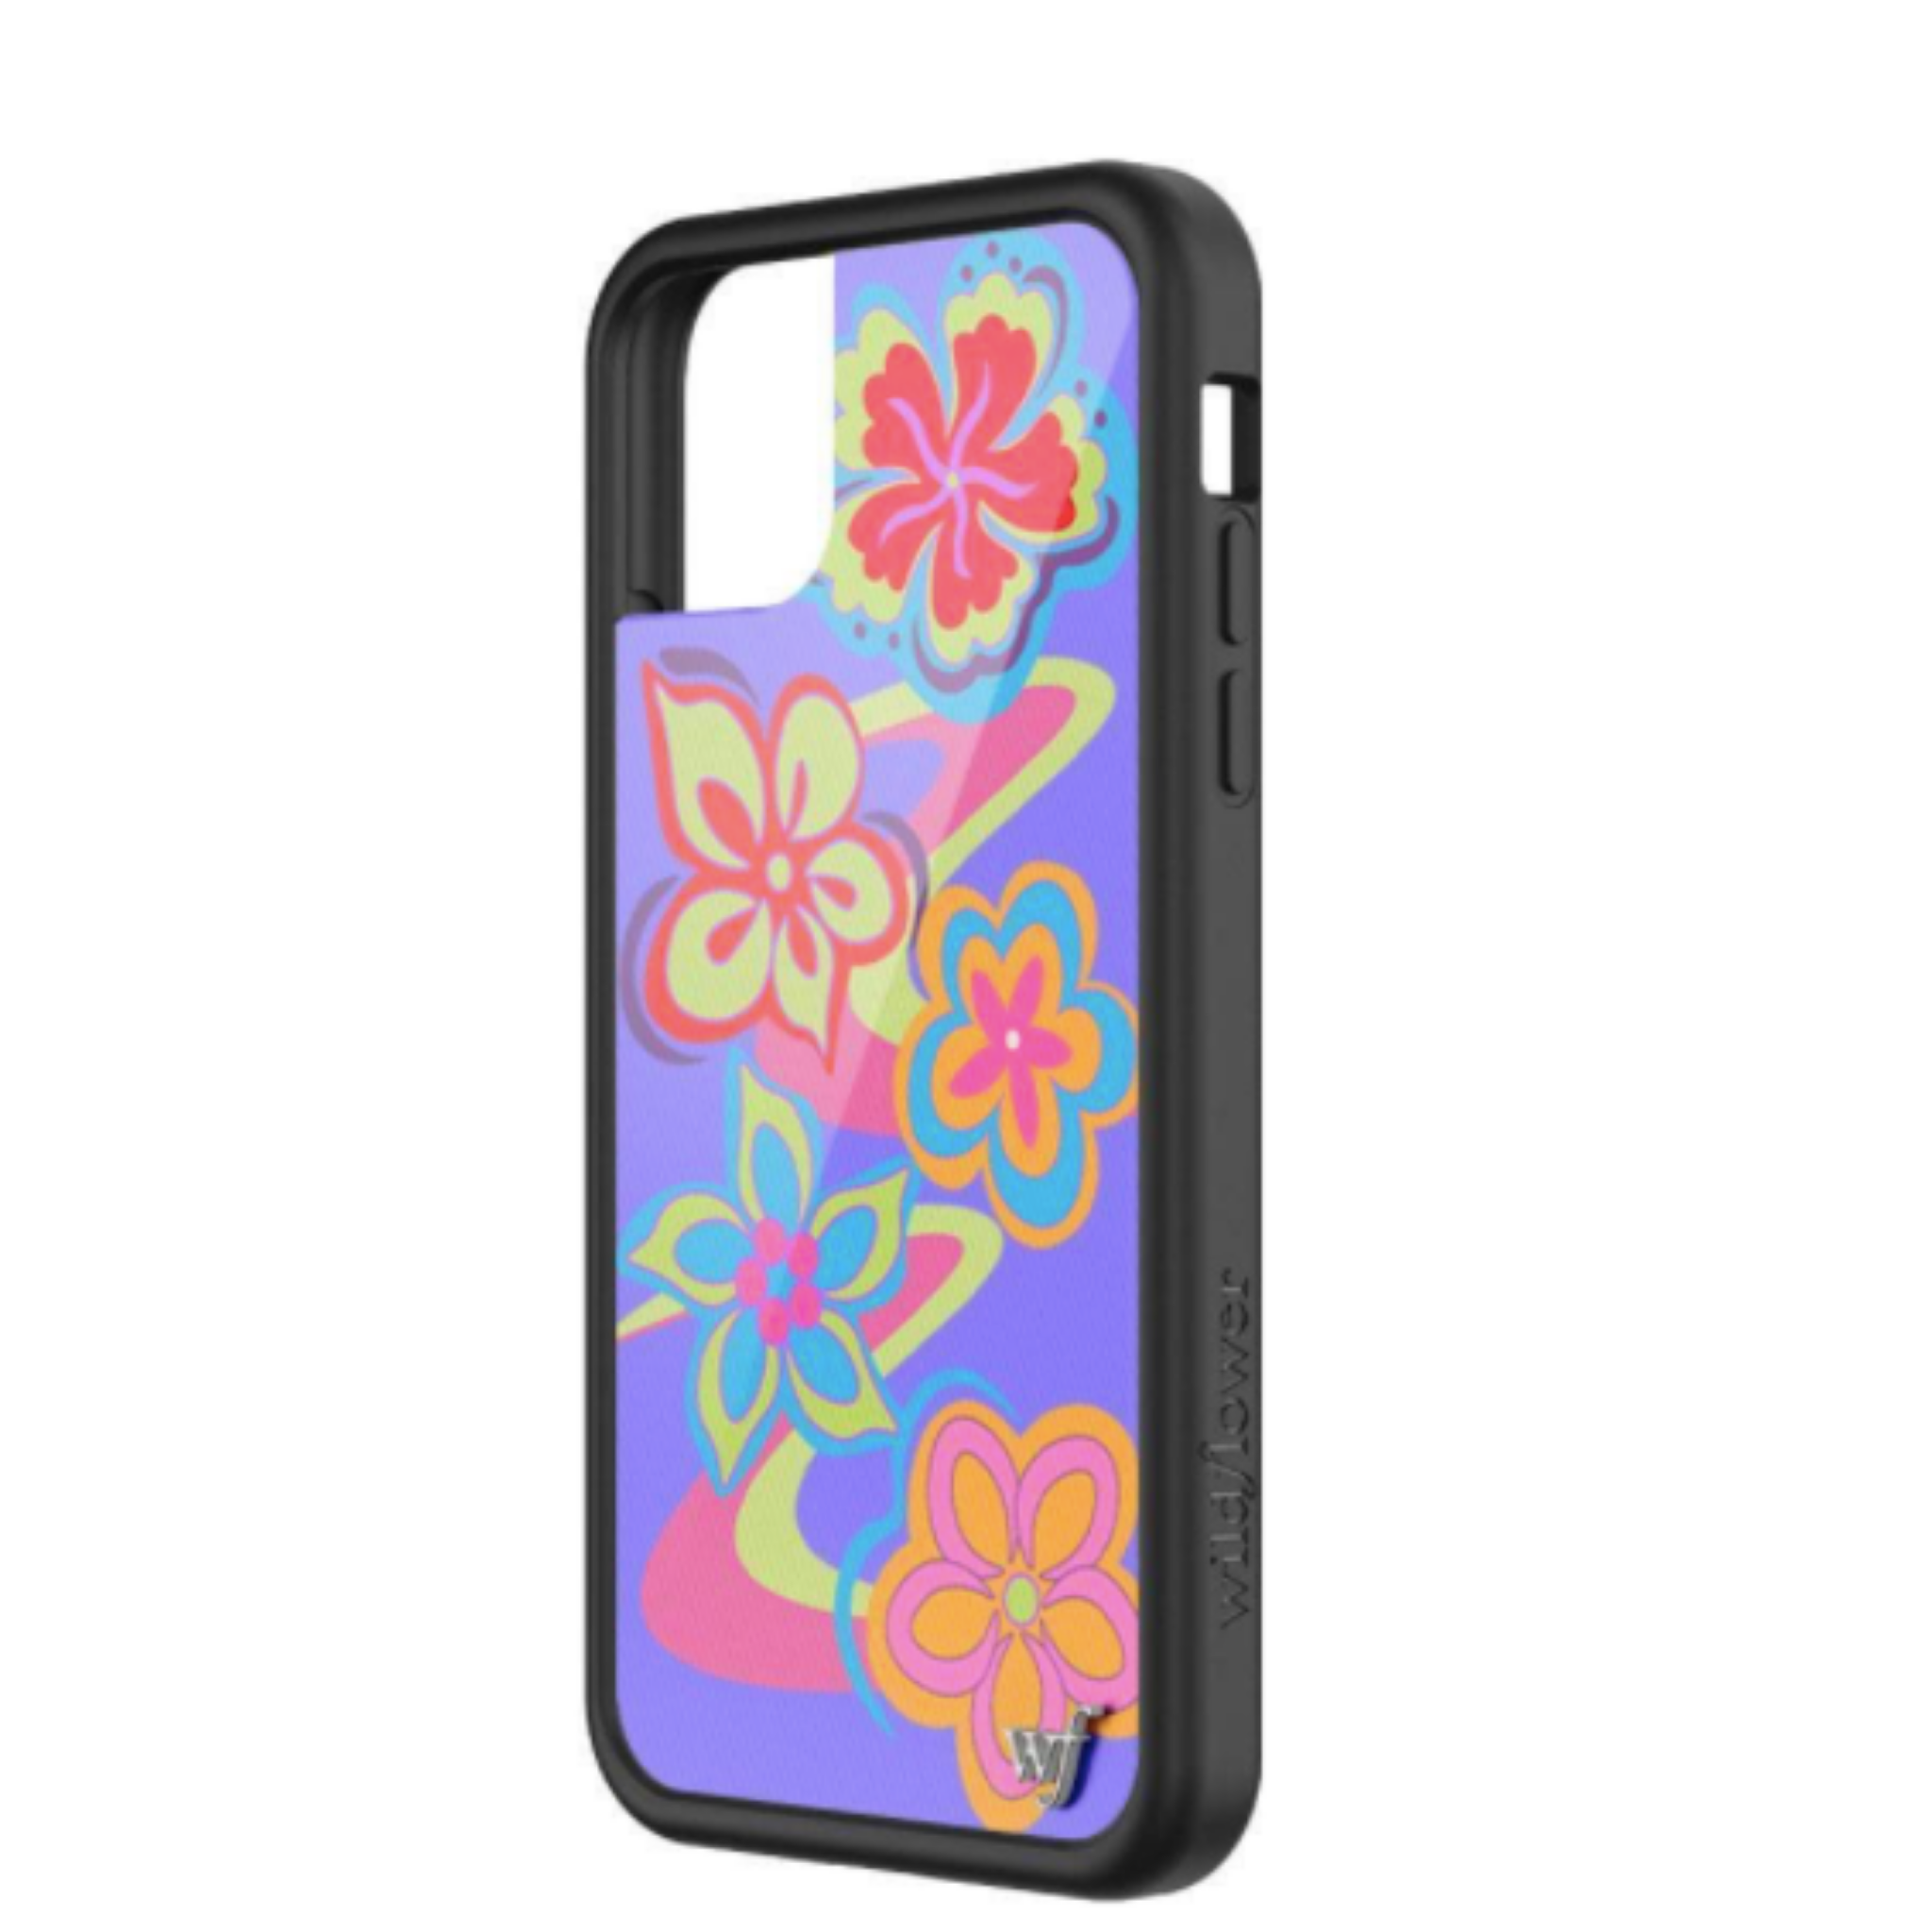 Surf's Up iPhone 12 Pro Max Case